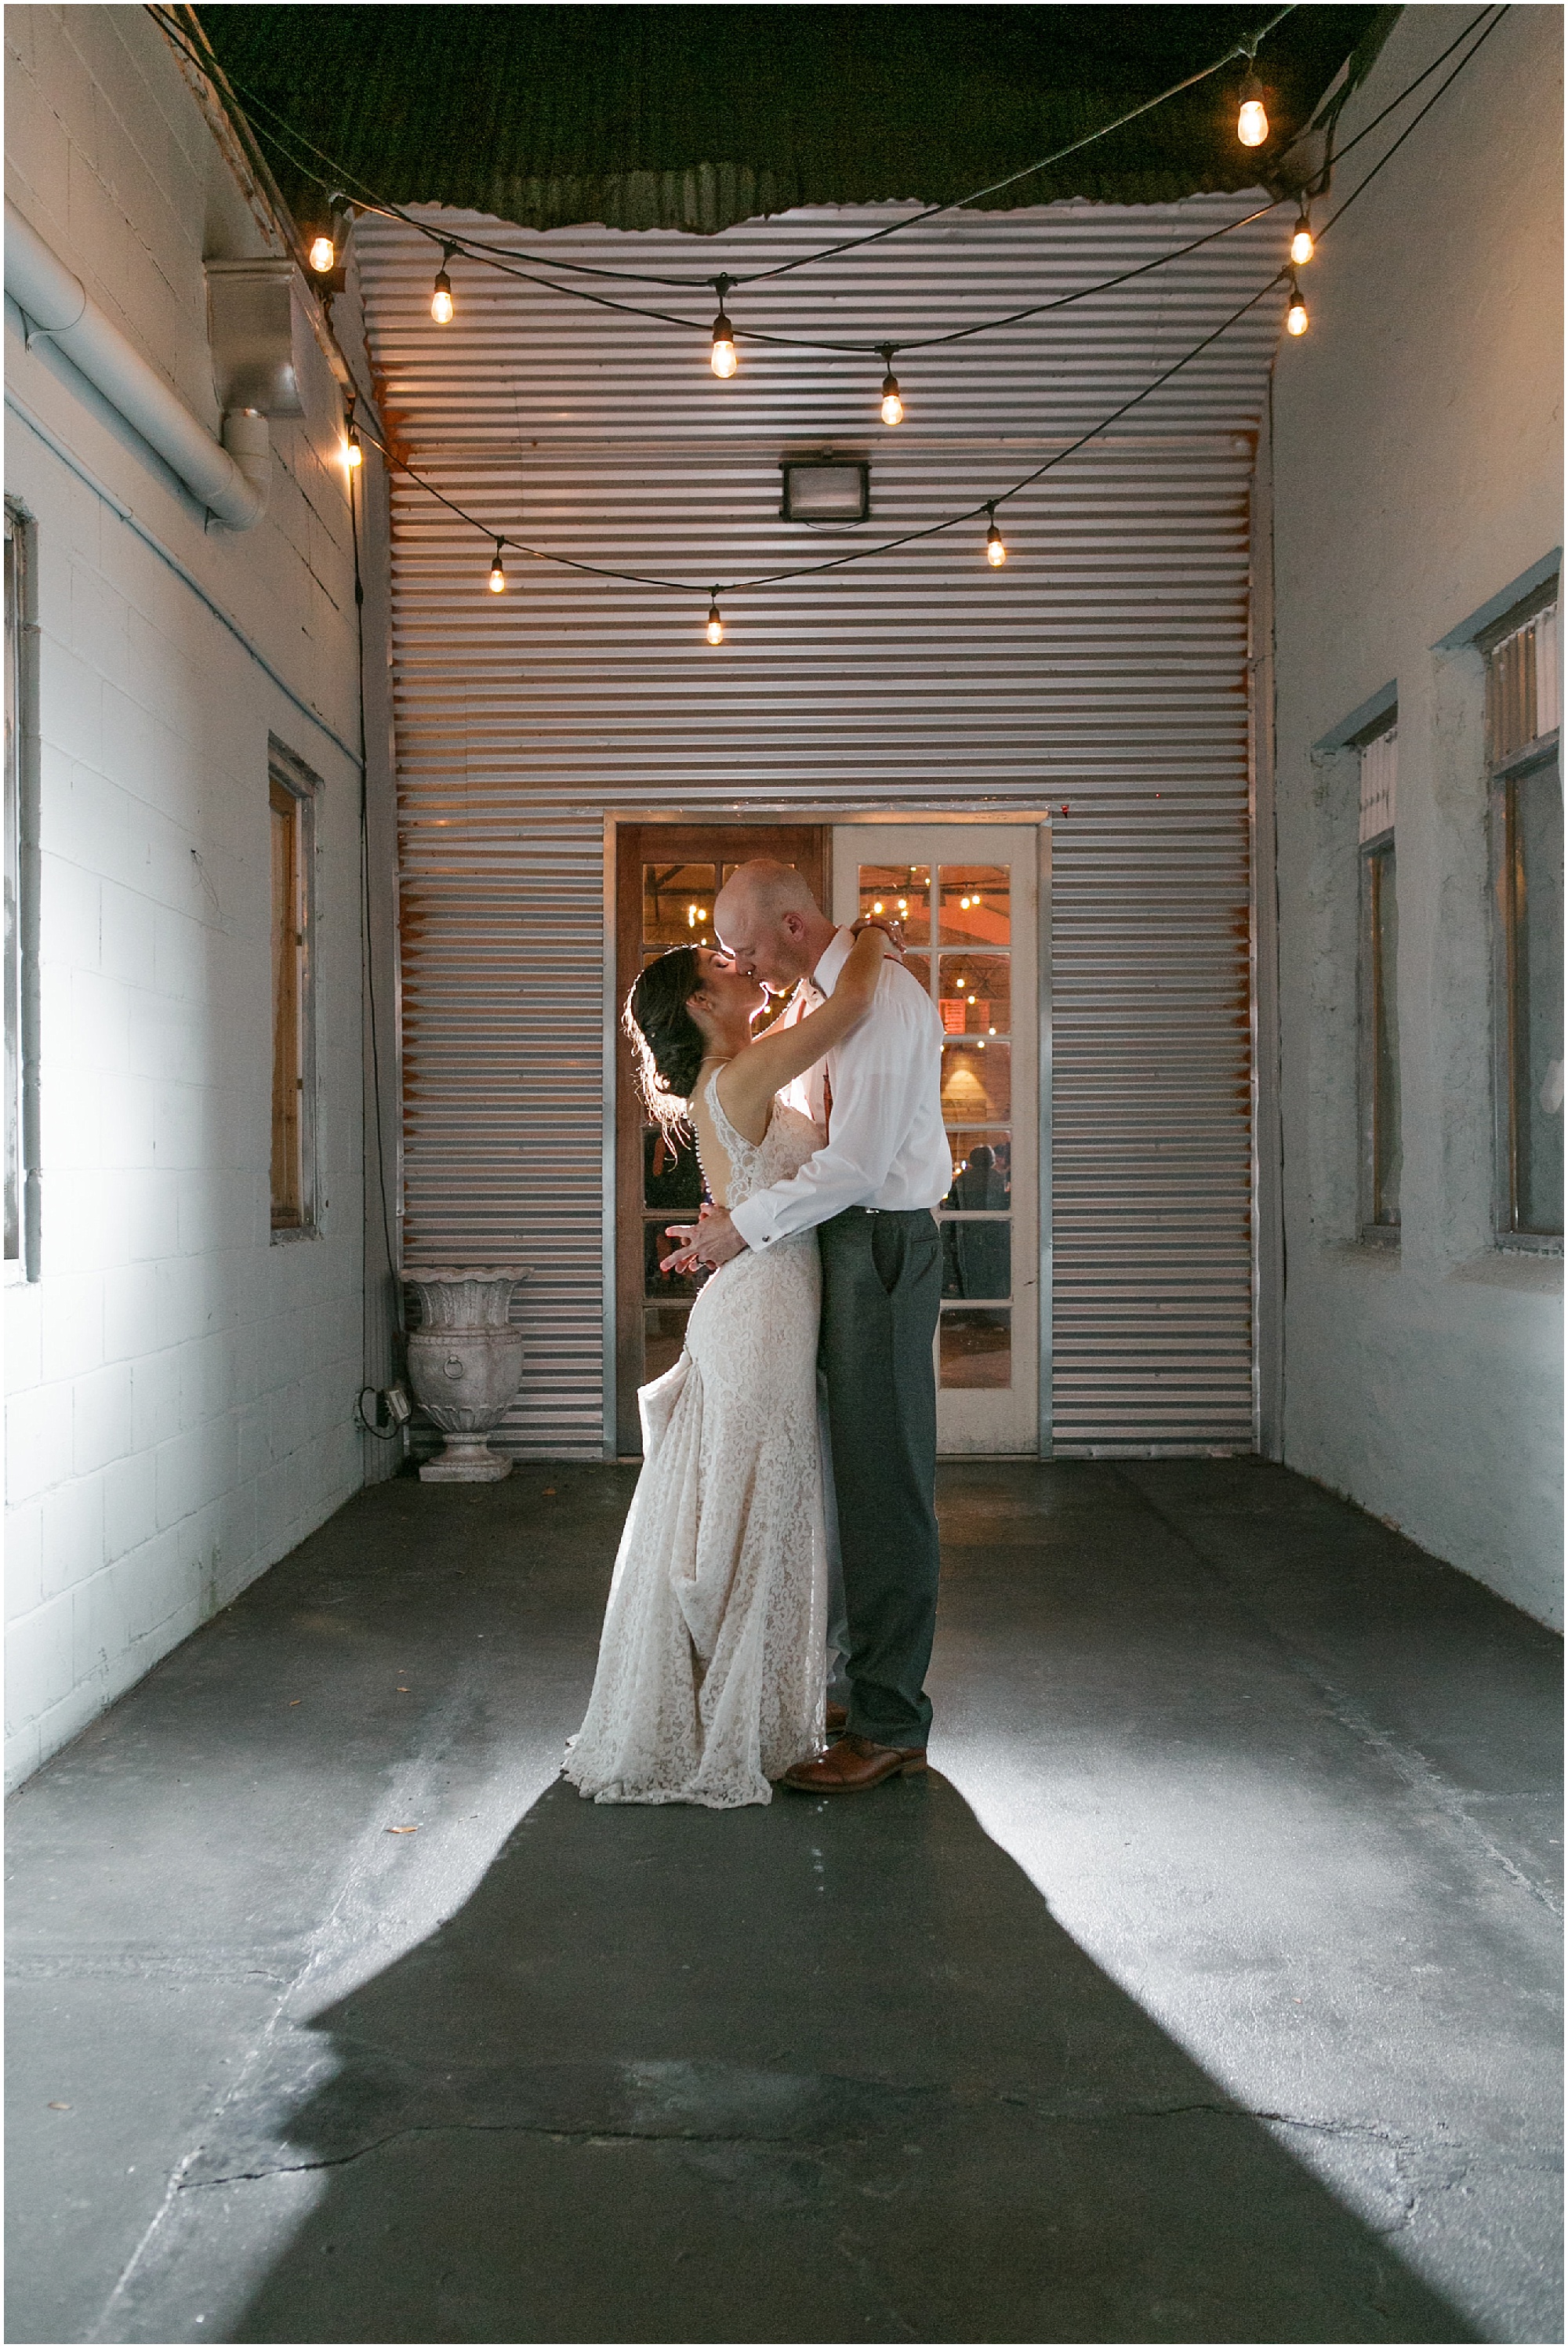 Downtown Orlando wedding couple sharing one more kiss at the end of the day.